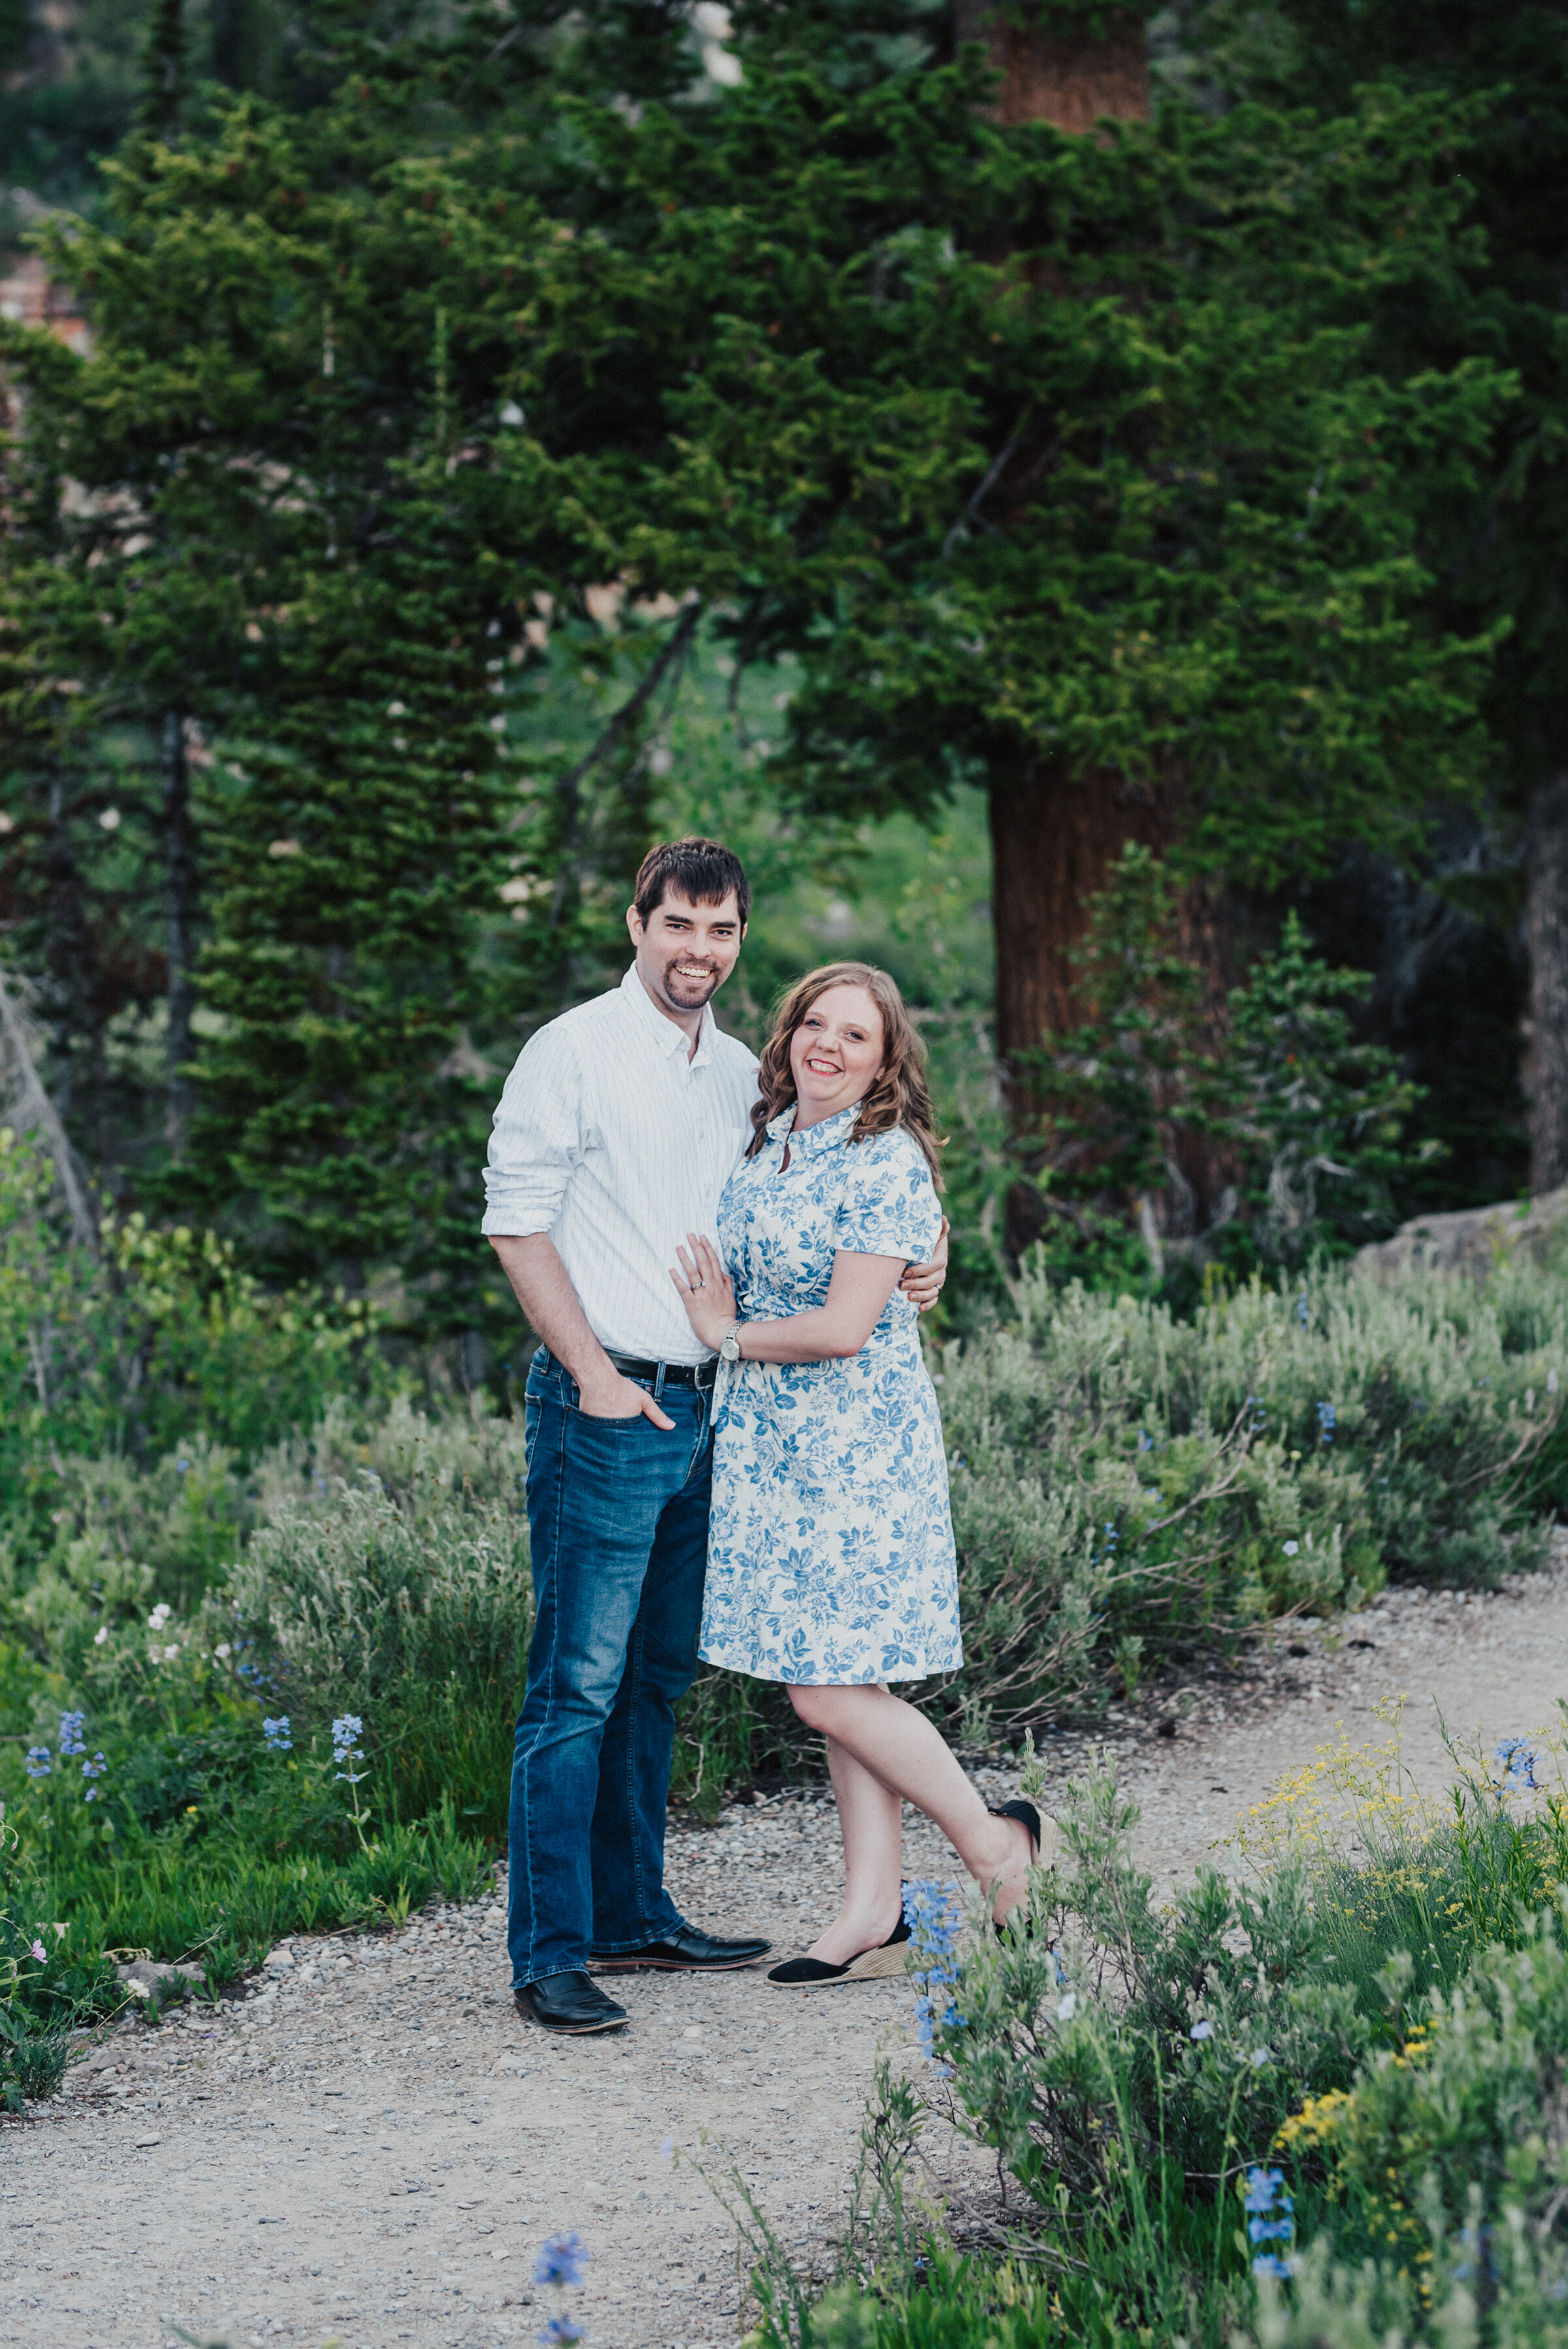  Happy couple during this gorgeous family photo session surrounded by lush forest up Logan canyon. Logan Utah family photographer Kristi Alyse photography Tony Grove forest nature photos Logan canyon light blue family photos wild flowers grand parents children parents spouses reunited dreamy scenic photo shoot #kristialysephotography #utahphotographer #familyphotography #logancanyon #familyphotos #forest #wildflowers #northernutah #familyportraits #family 